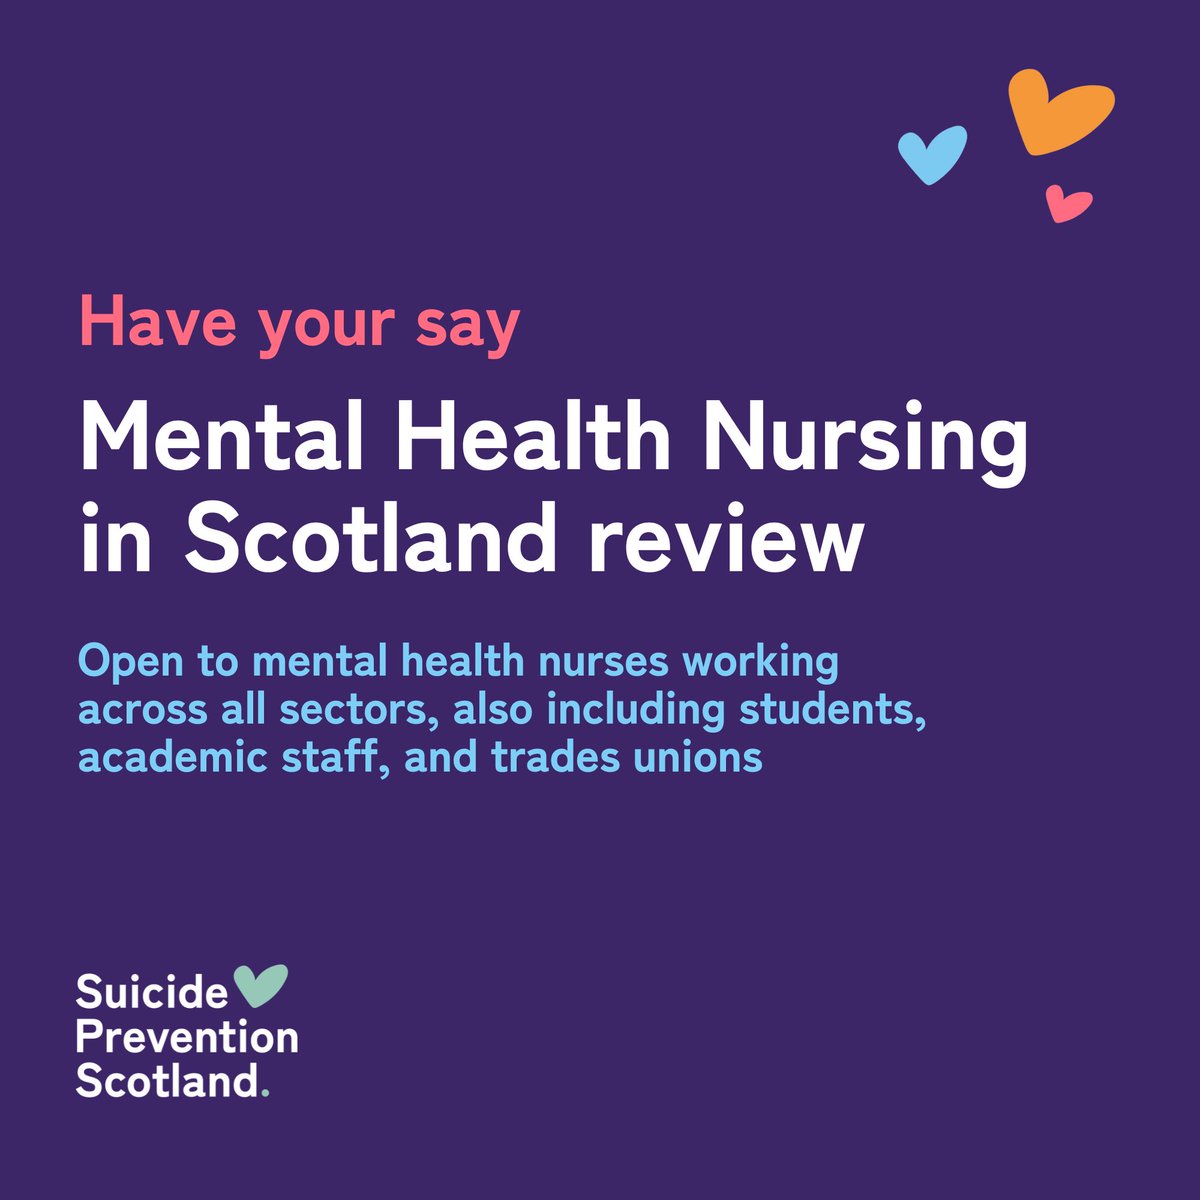 As part of the Mental Health and Wellbeing Workforce Action Plan a review of Mental Health Nursing in Scotland is taking place. Mental health nurses working in all sectors including students, academic staff, and trades unions are invited to take part. ➡️ forms.office.com/Pages/Response…